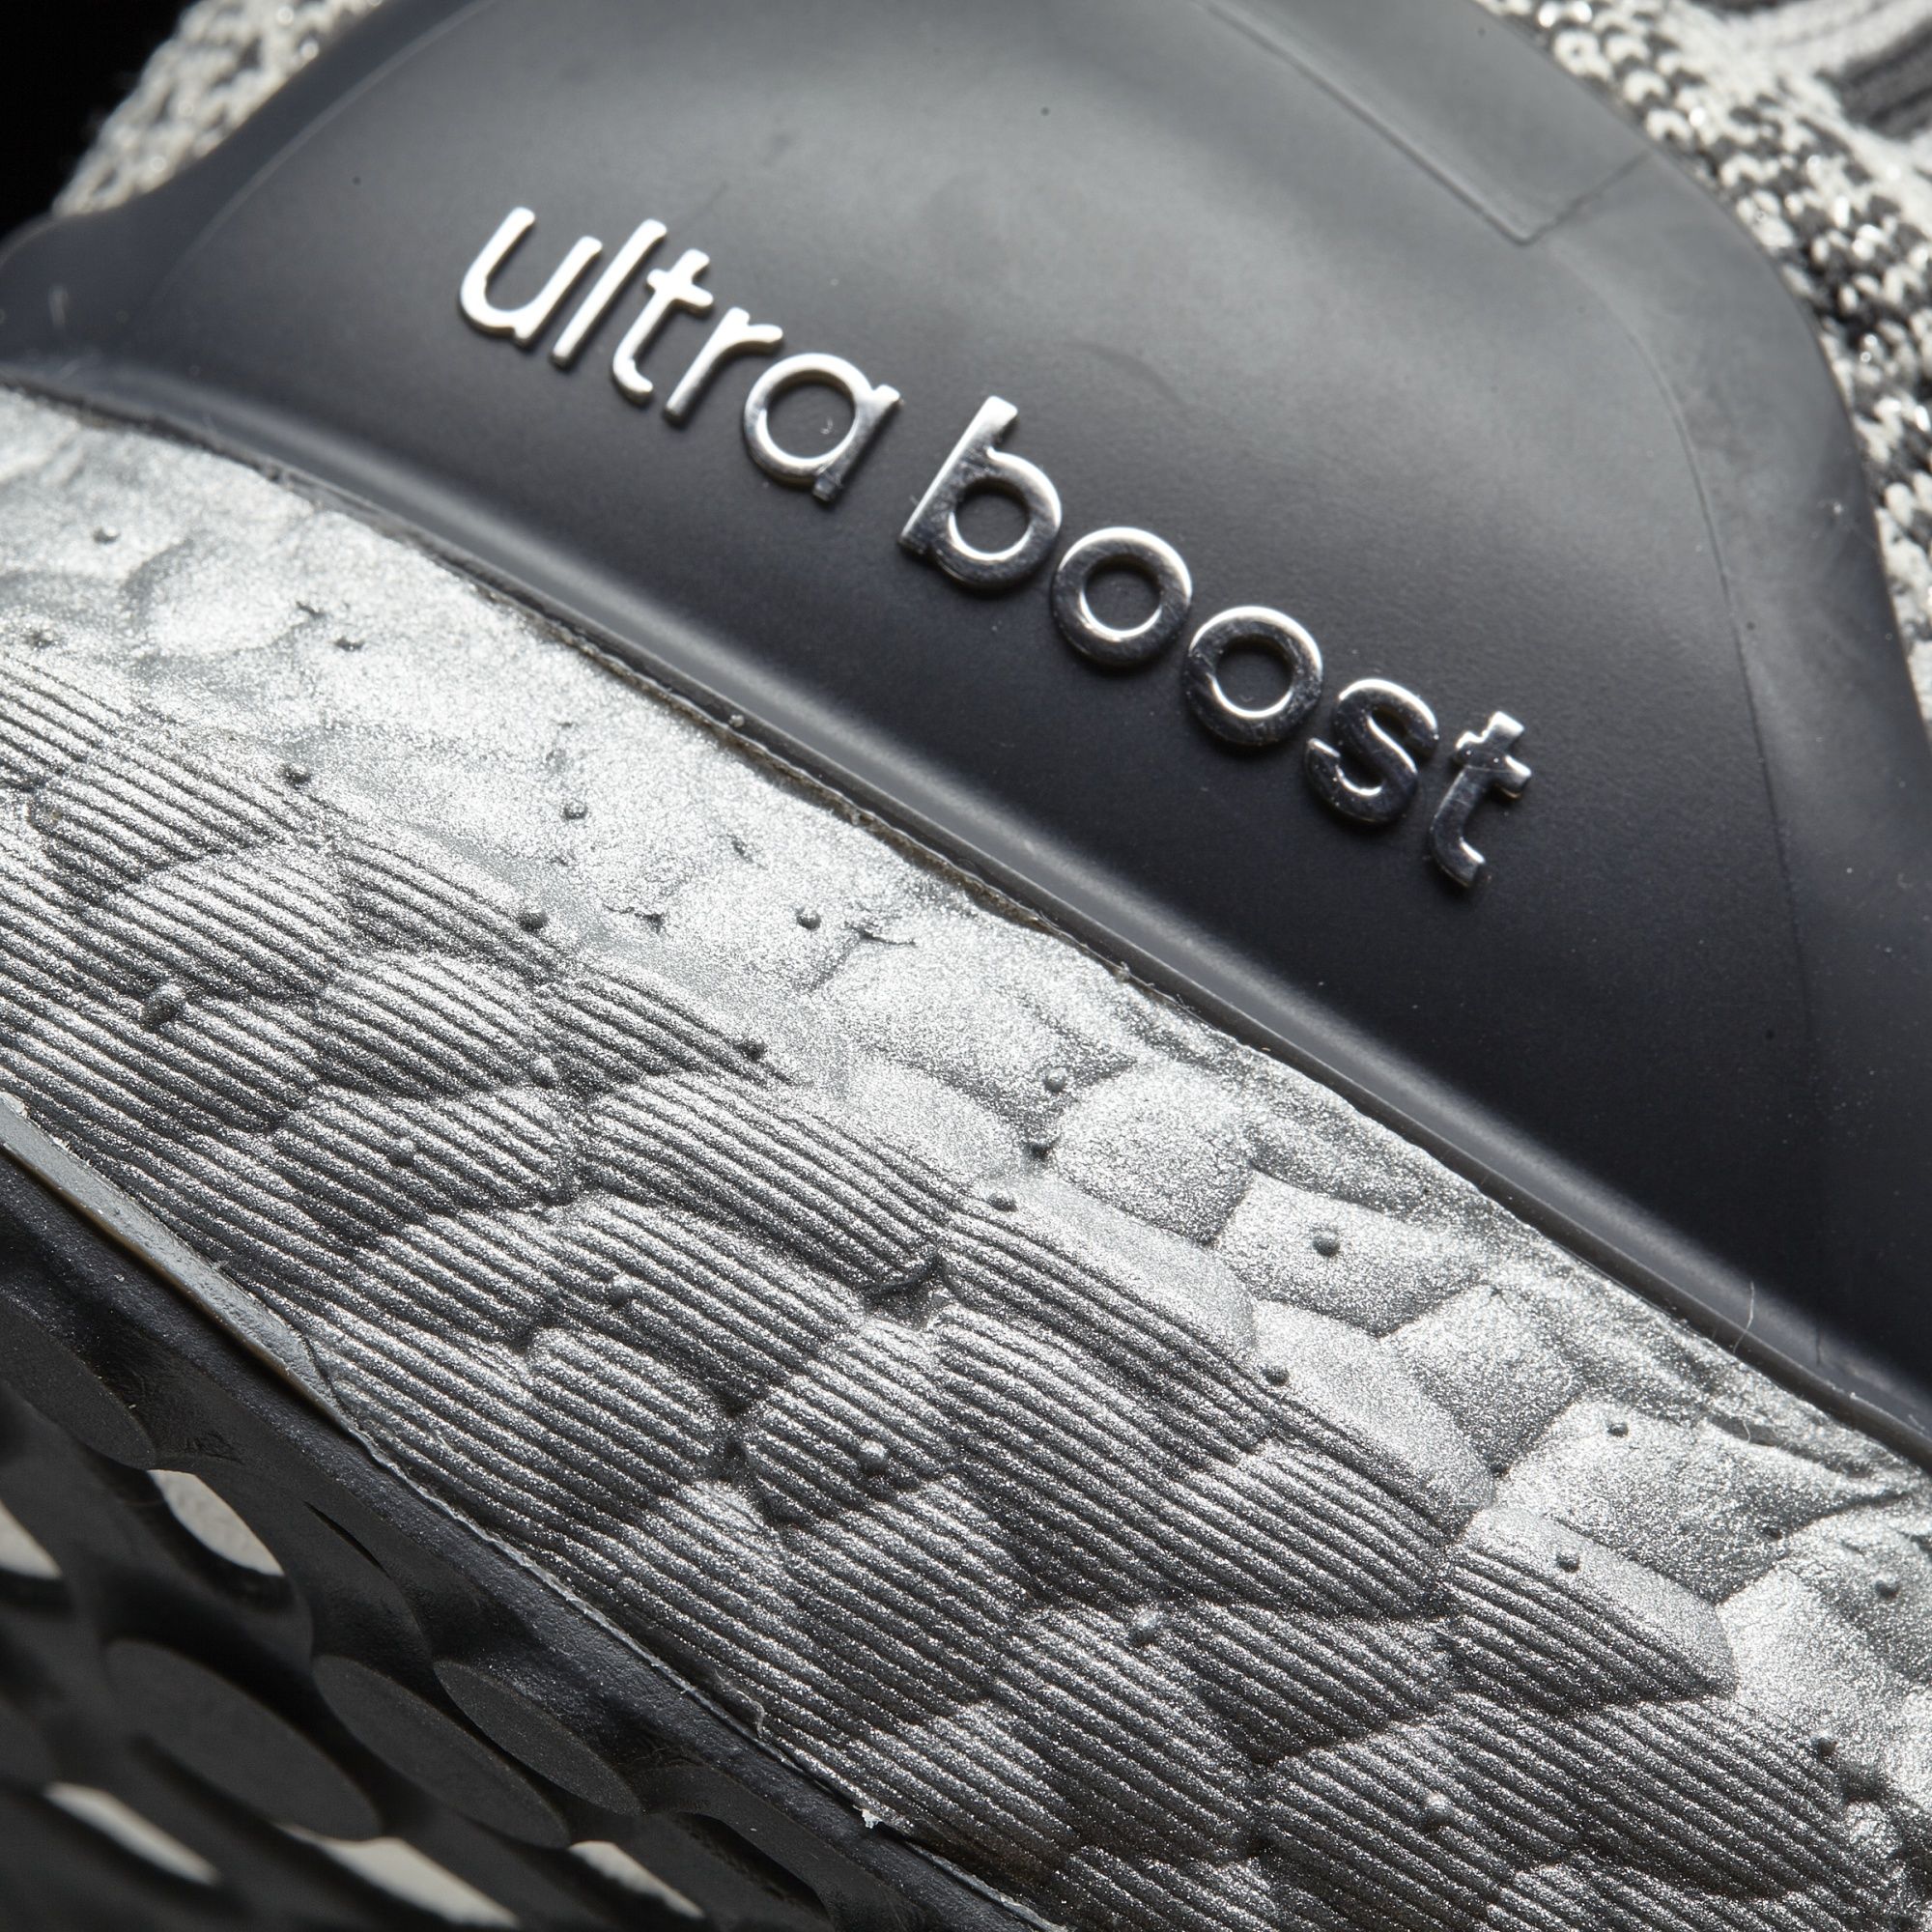 Adidas UltraBOOST Uncaged
« Silver BOOST »